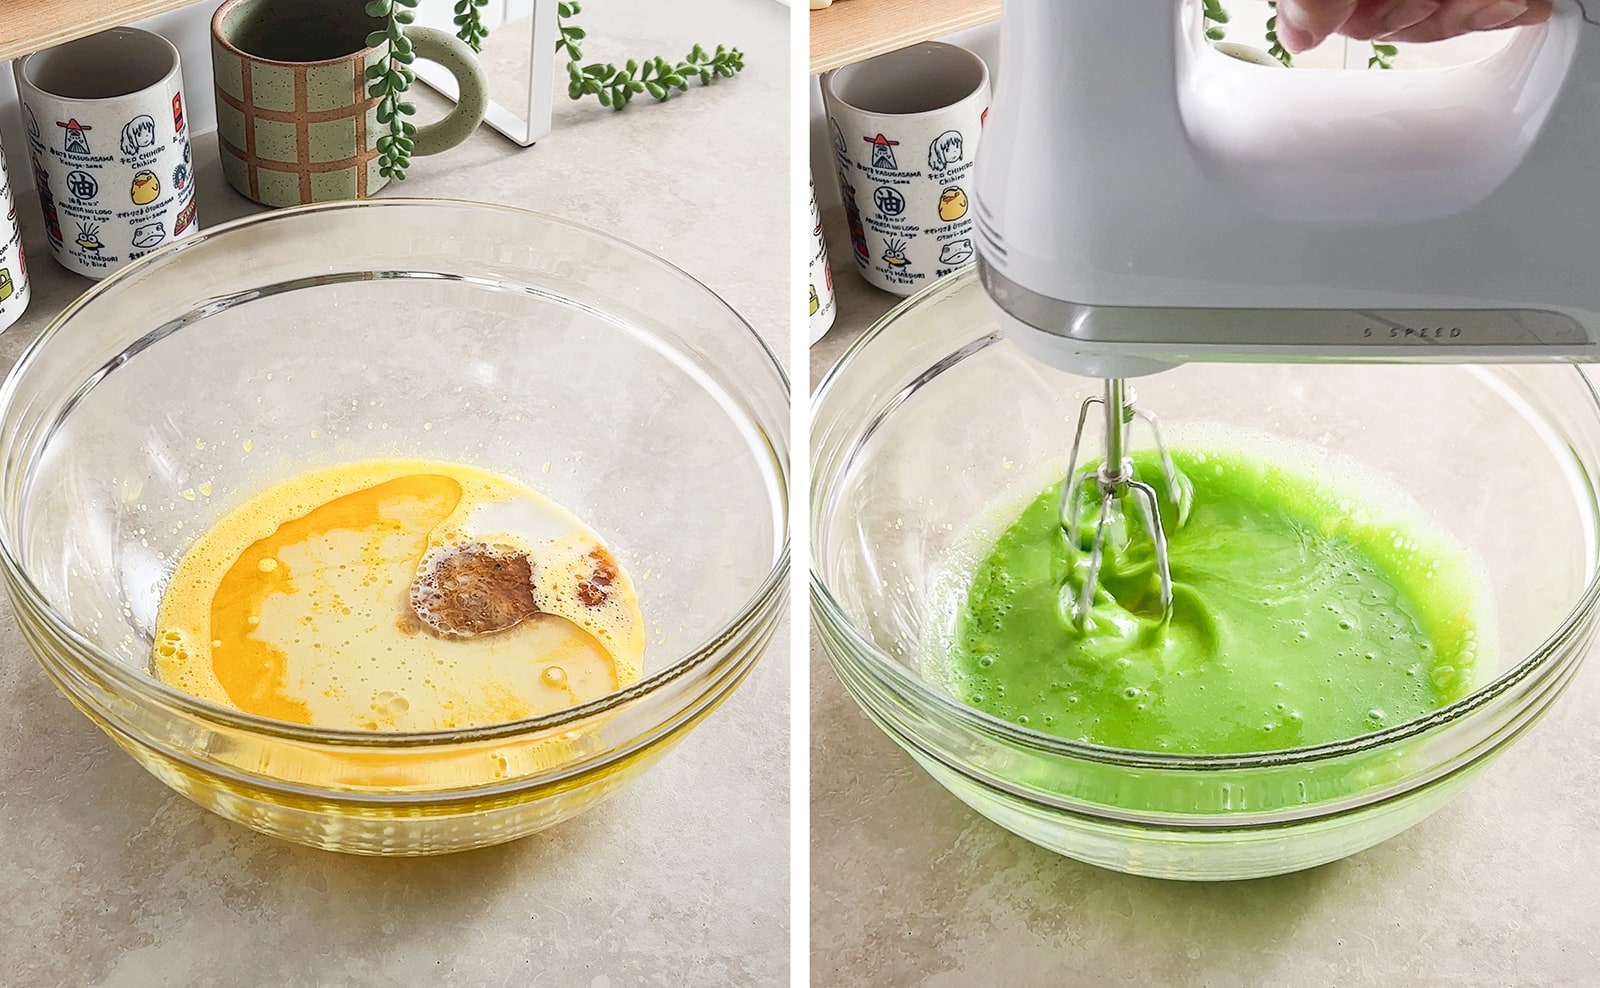 Left to right: ingredients for egg yolk mixture in a bowl, hand mixer beating green pandan batter in a bowl.